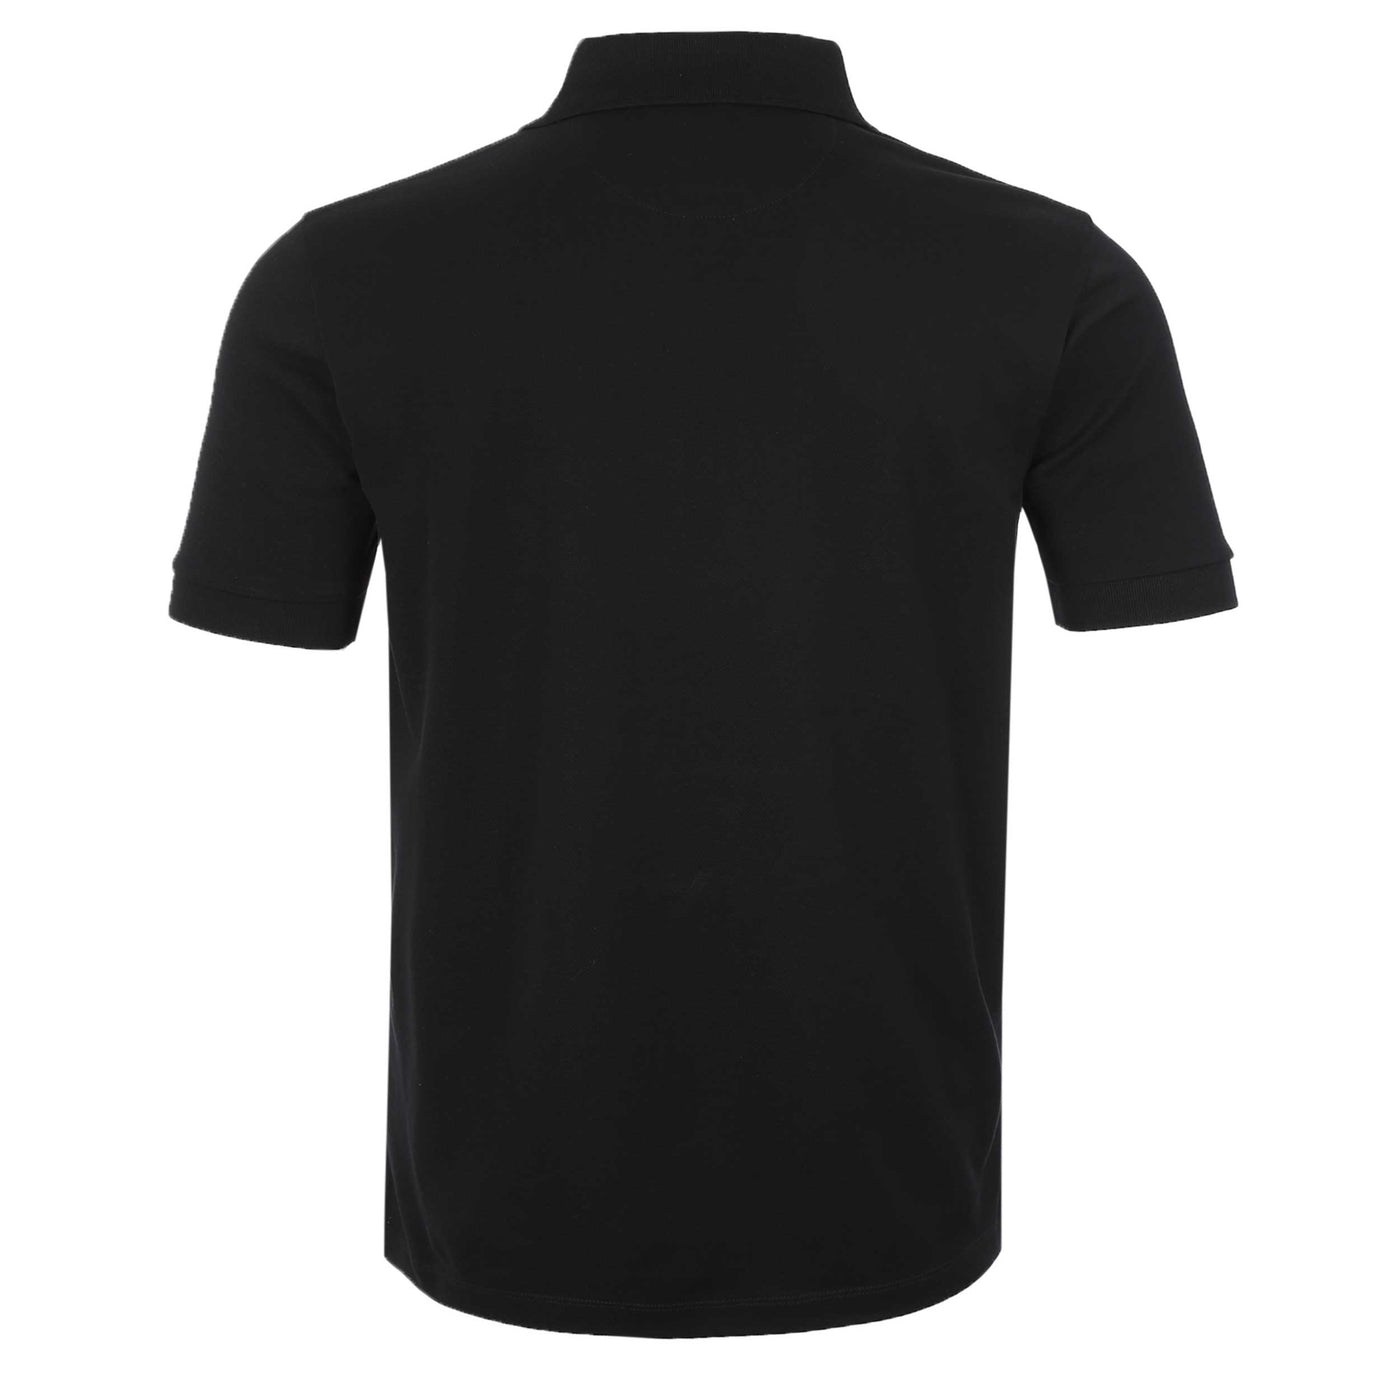 Paul Smith Placket Polo Shirt in Black Back